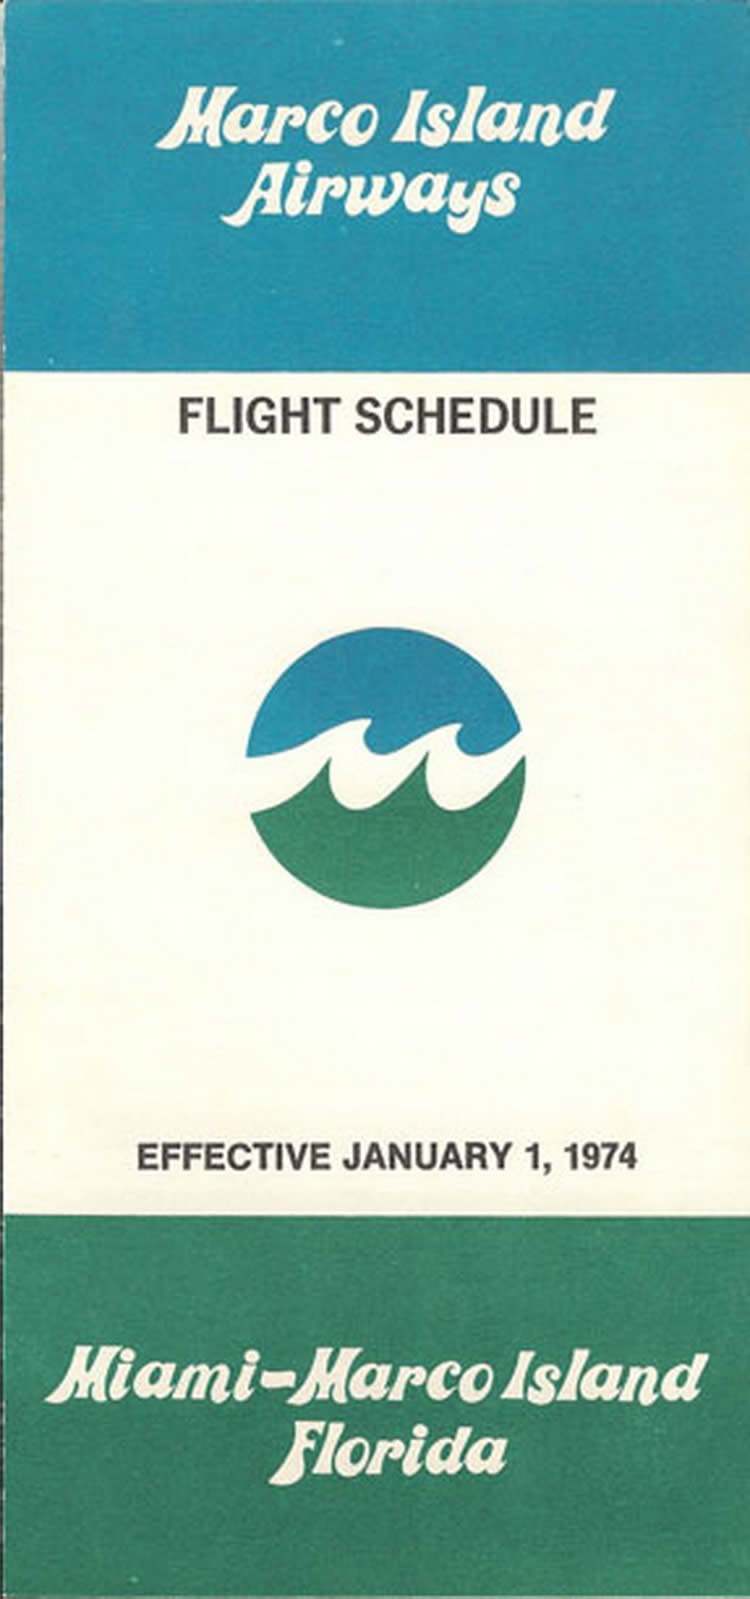 vintage airline timetable for Marco Island Airways